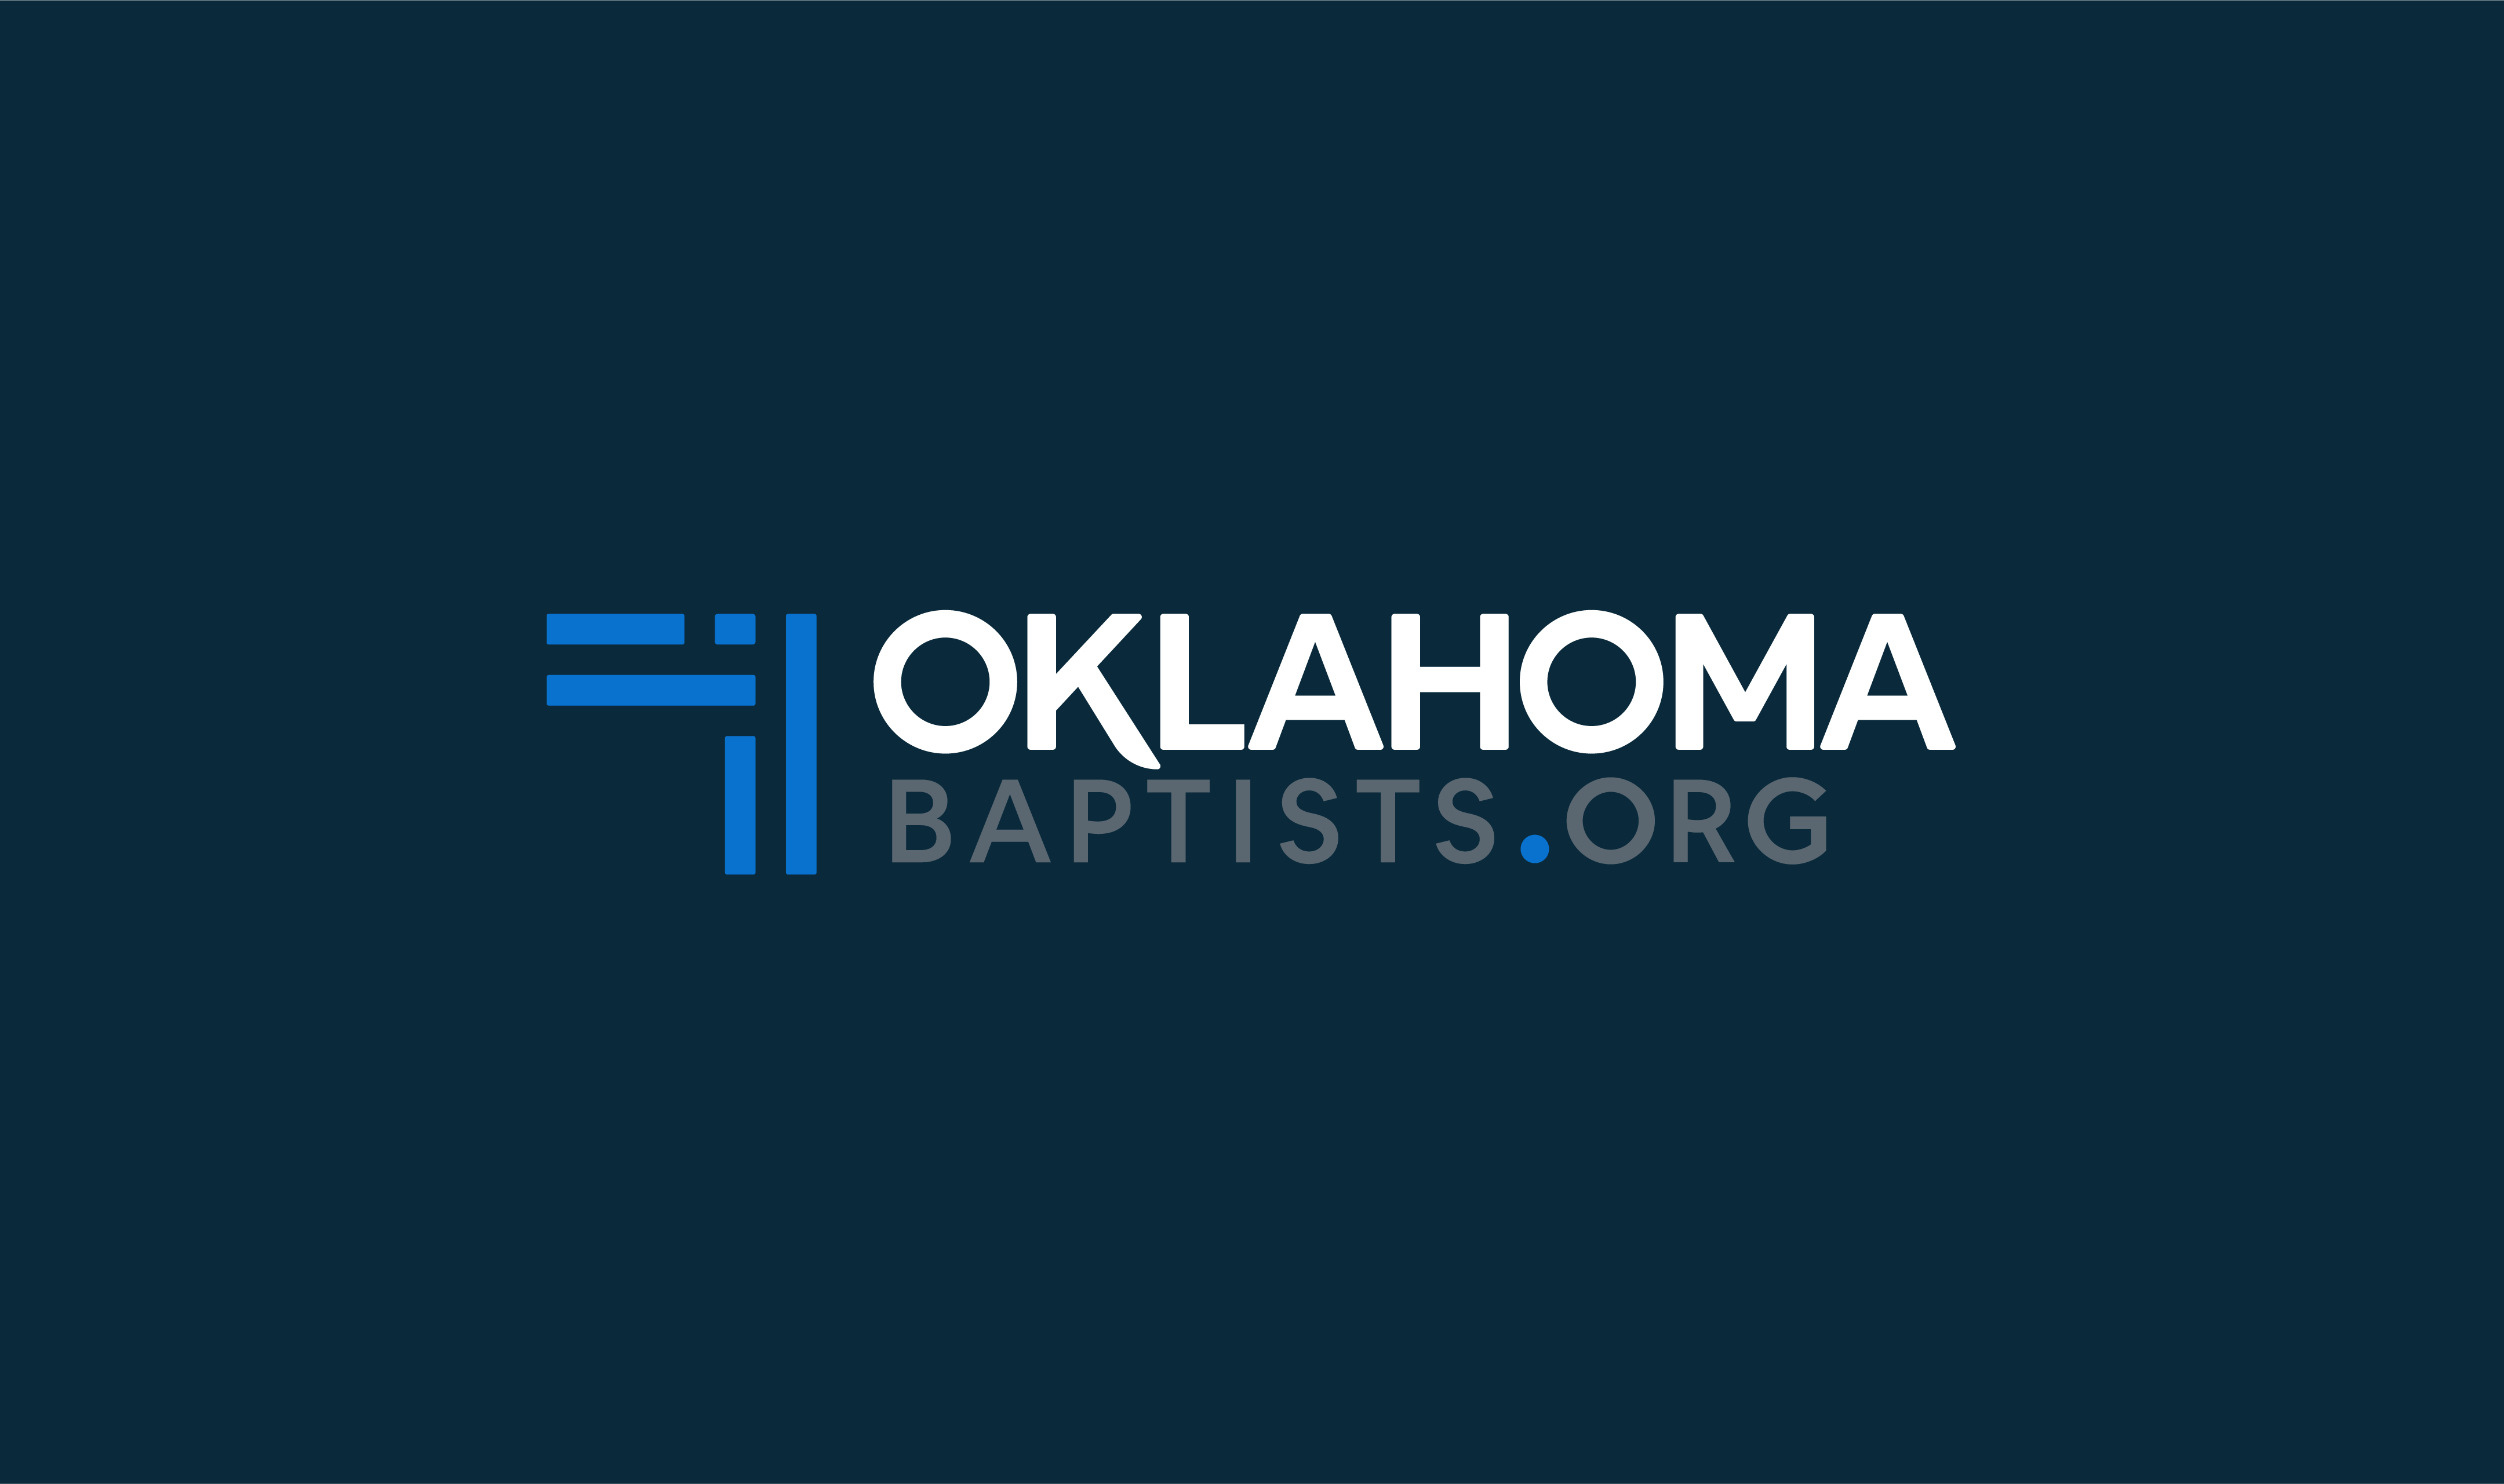 A version of the Oklahoma Baptists logo pointing to oklahomabaptists.org